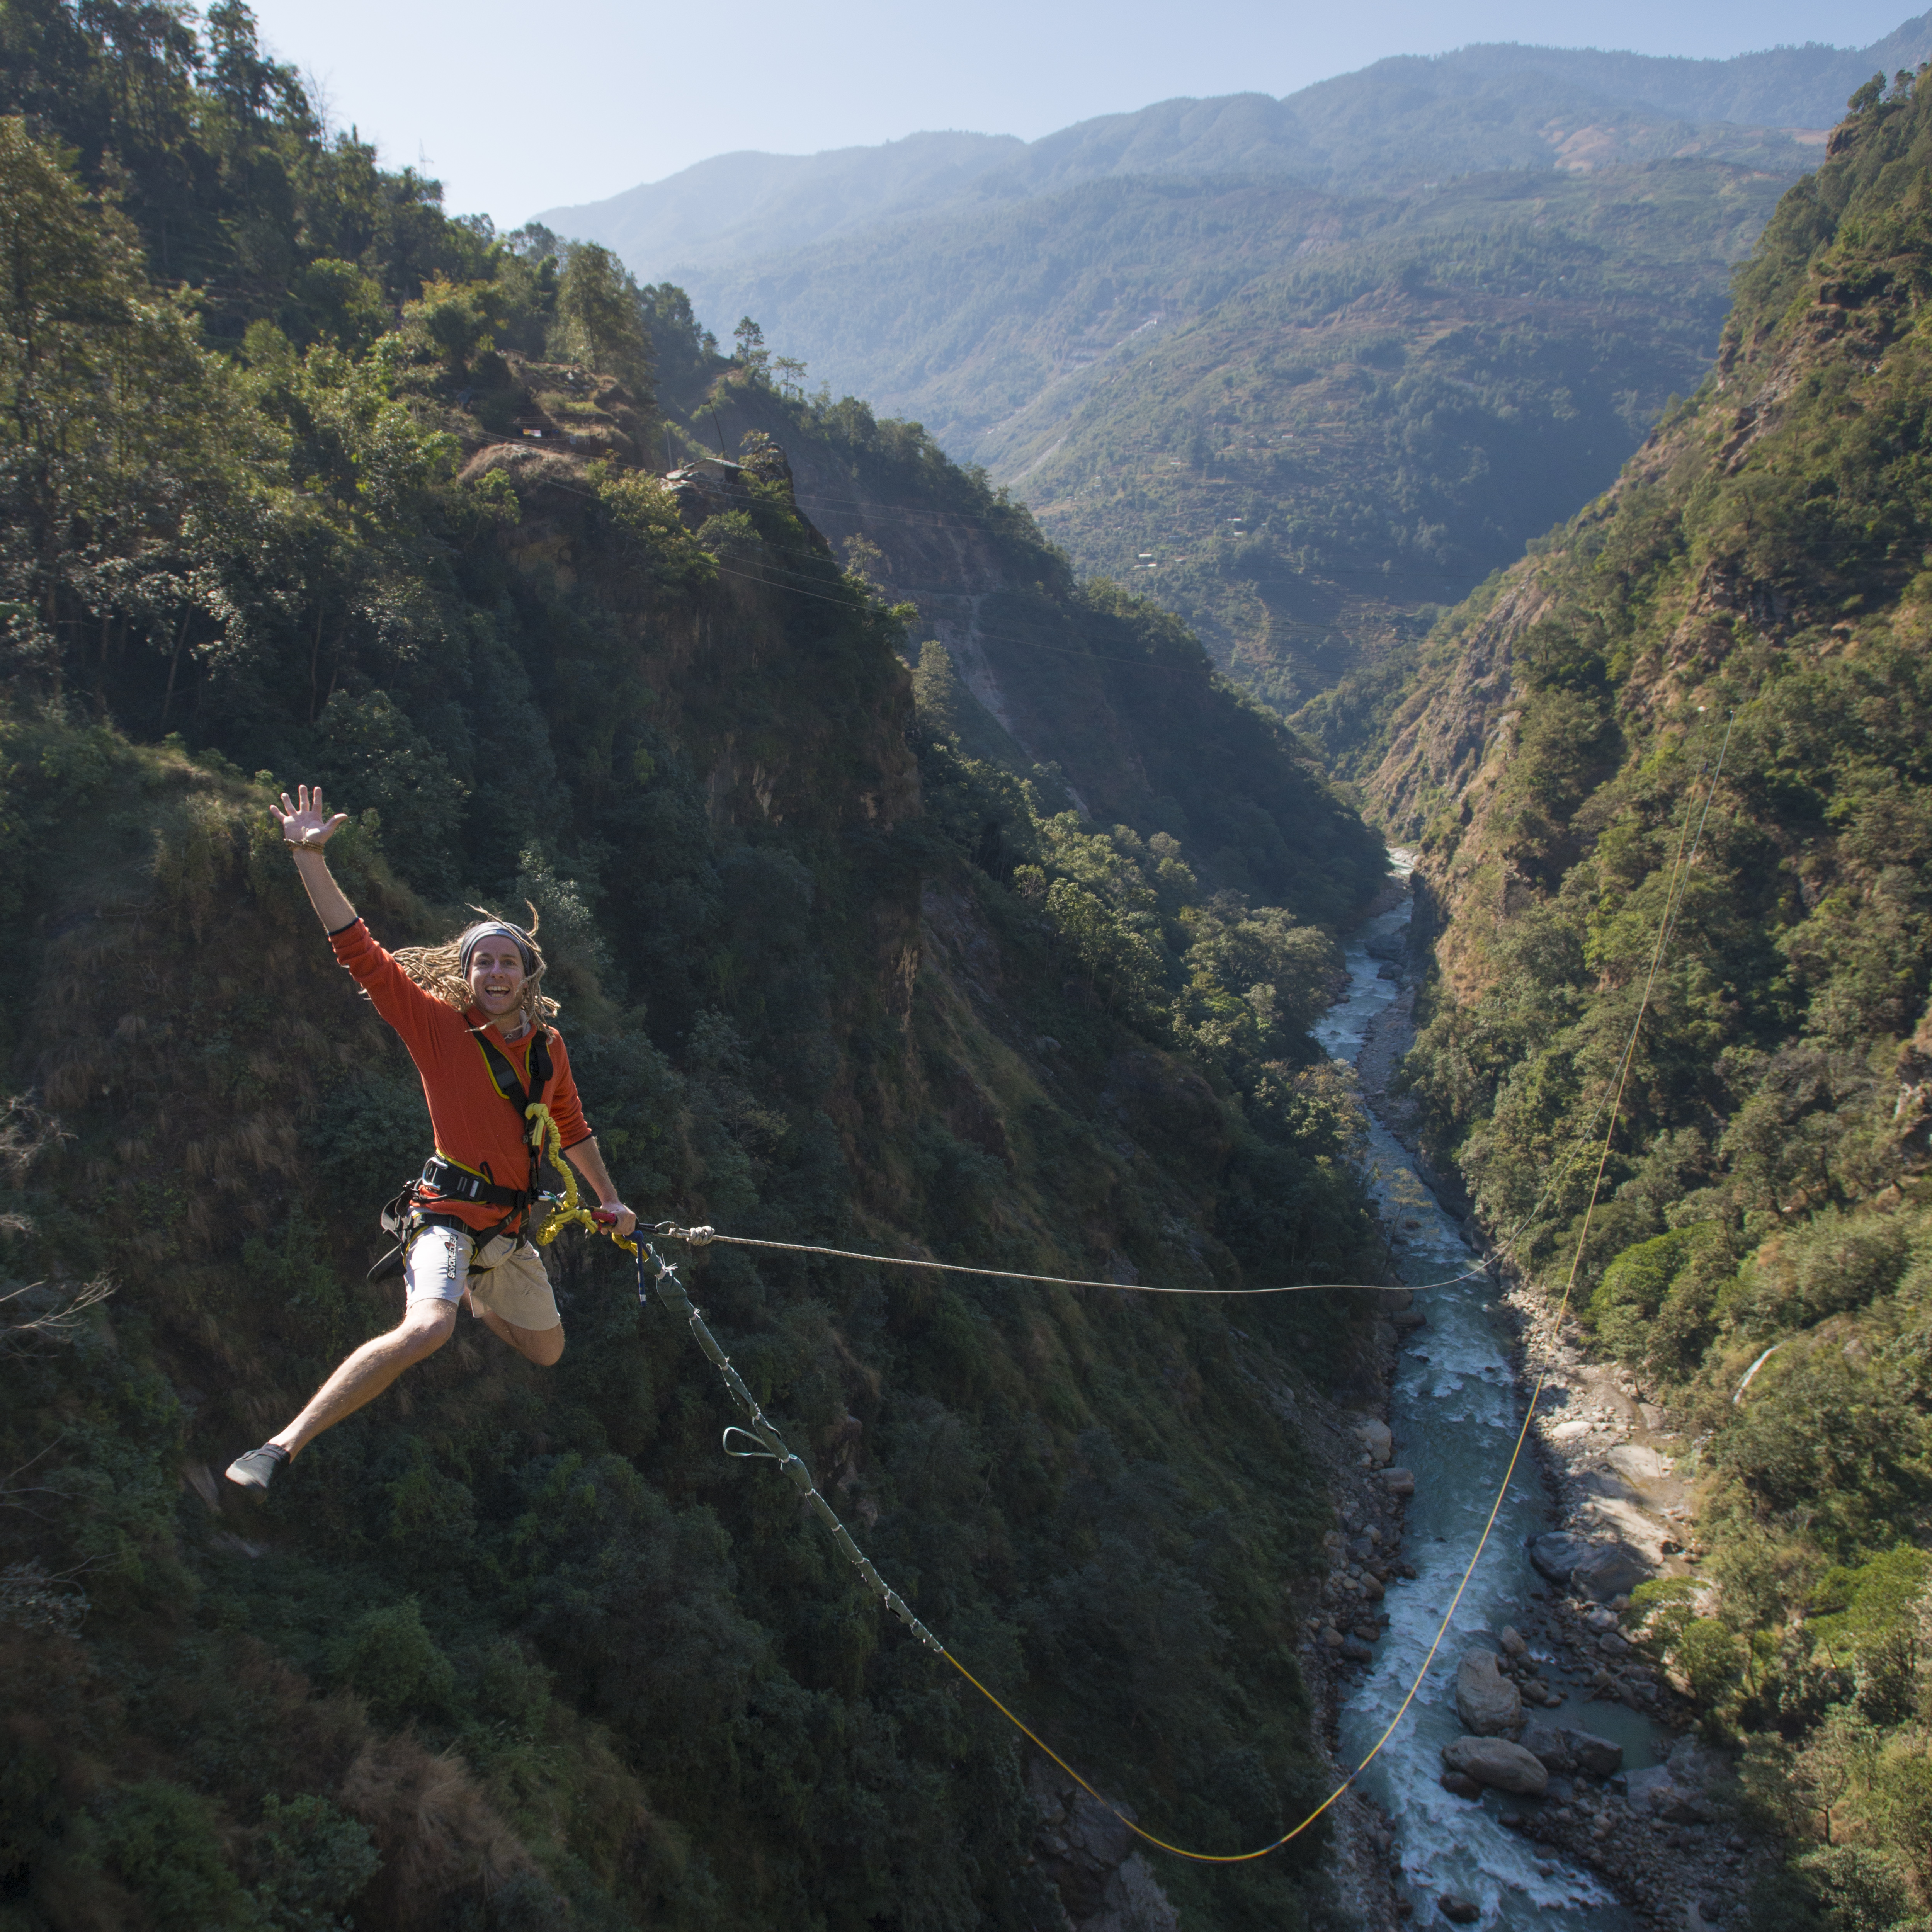 FREE FALL FROM THE WORLD’S HIGHEST CANYON SWING